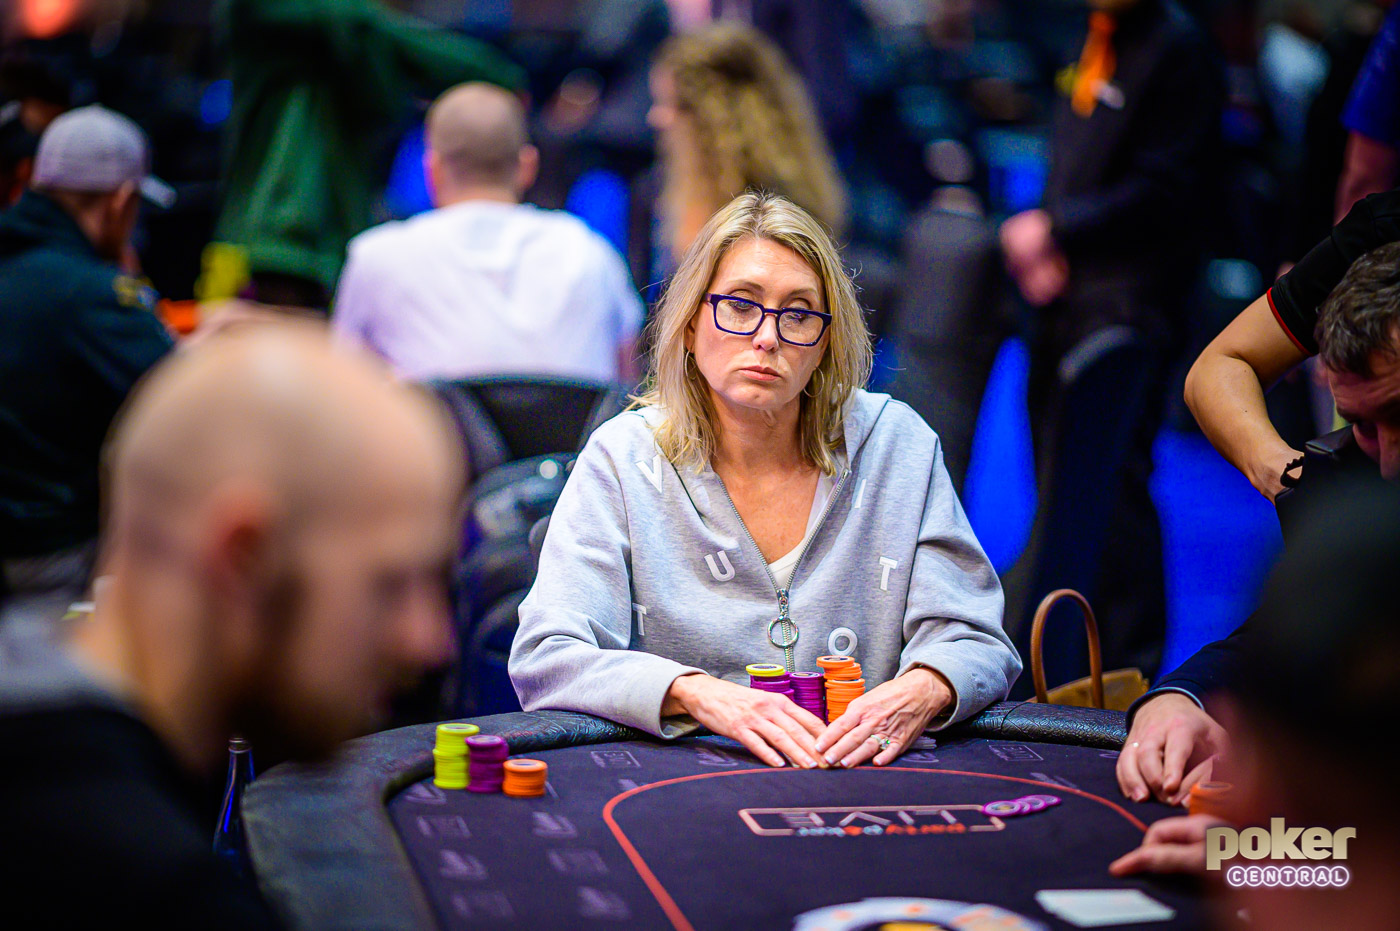 how old is poker player kathy lehne